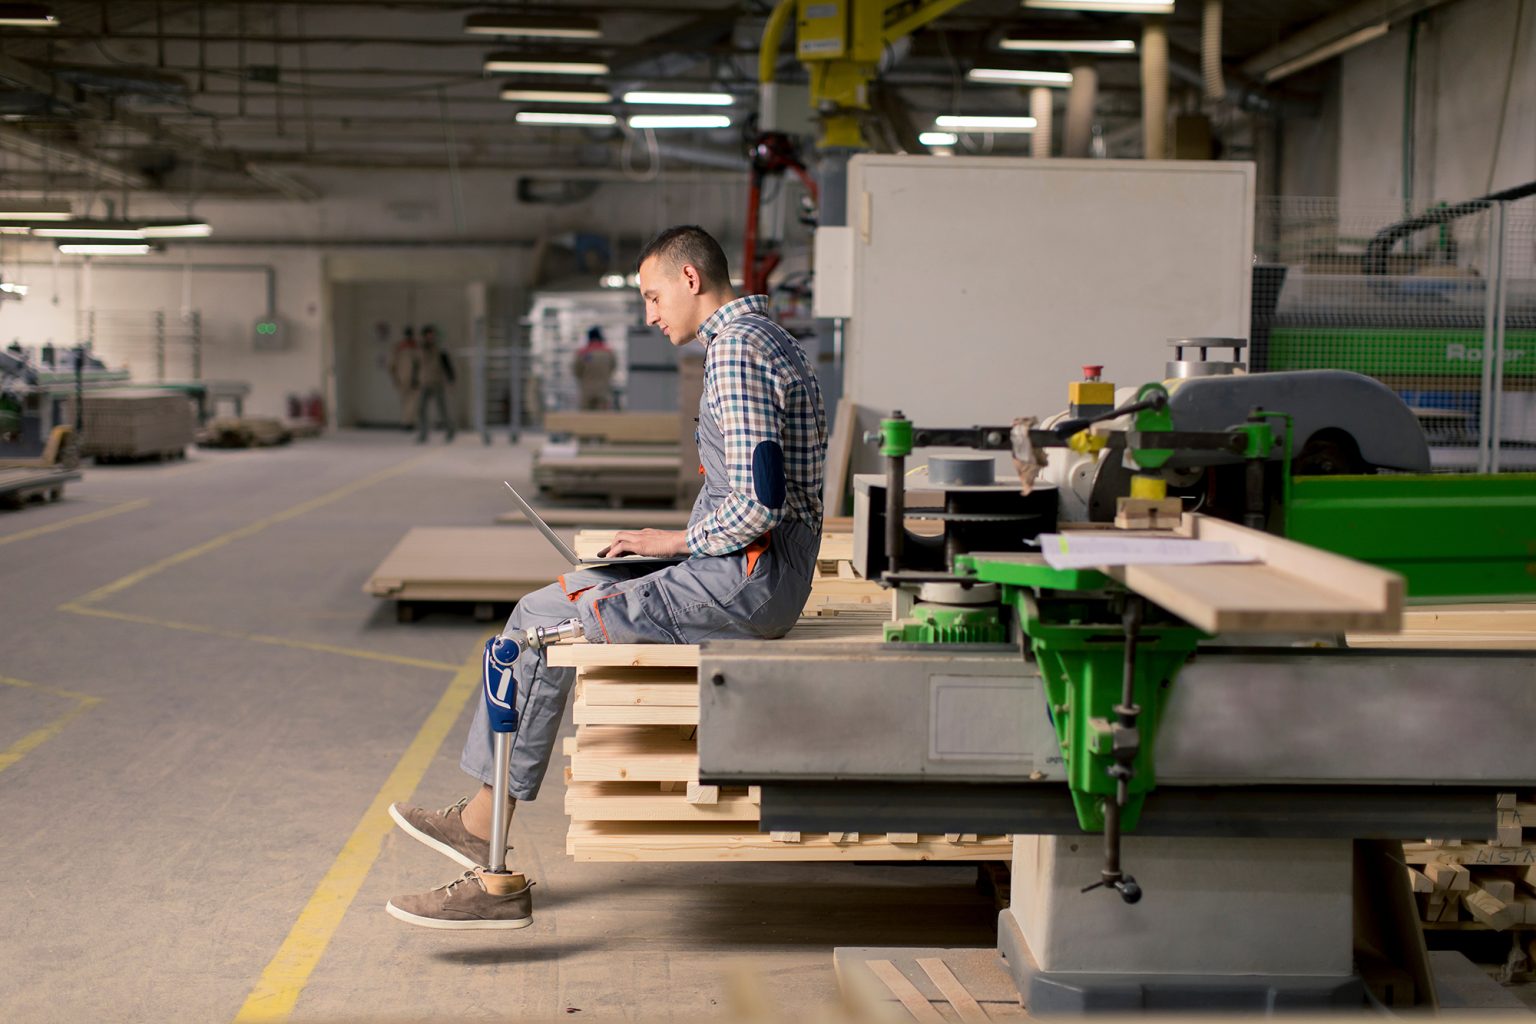 Disabled young man with an artificial leg is working at the furn